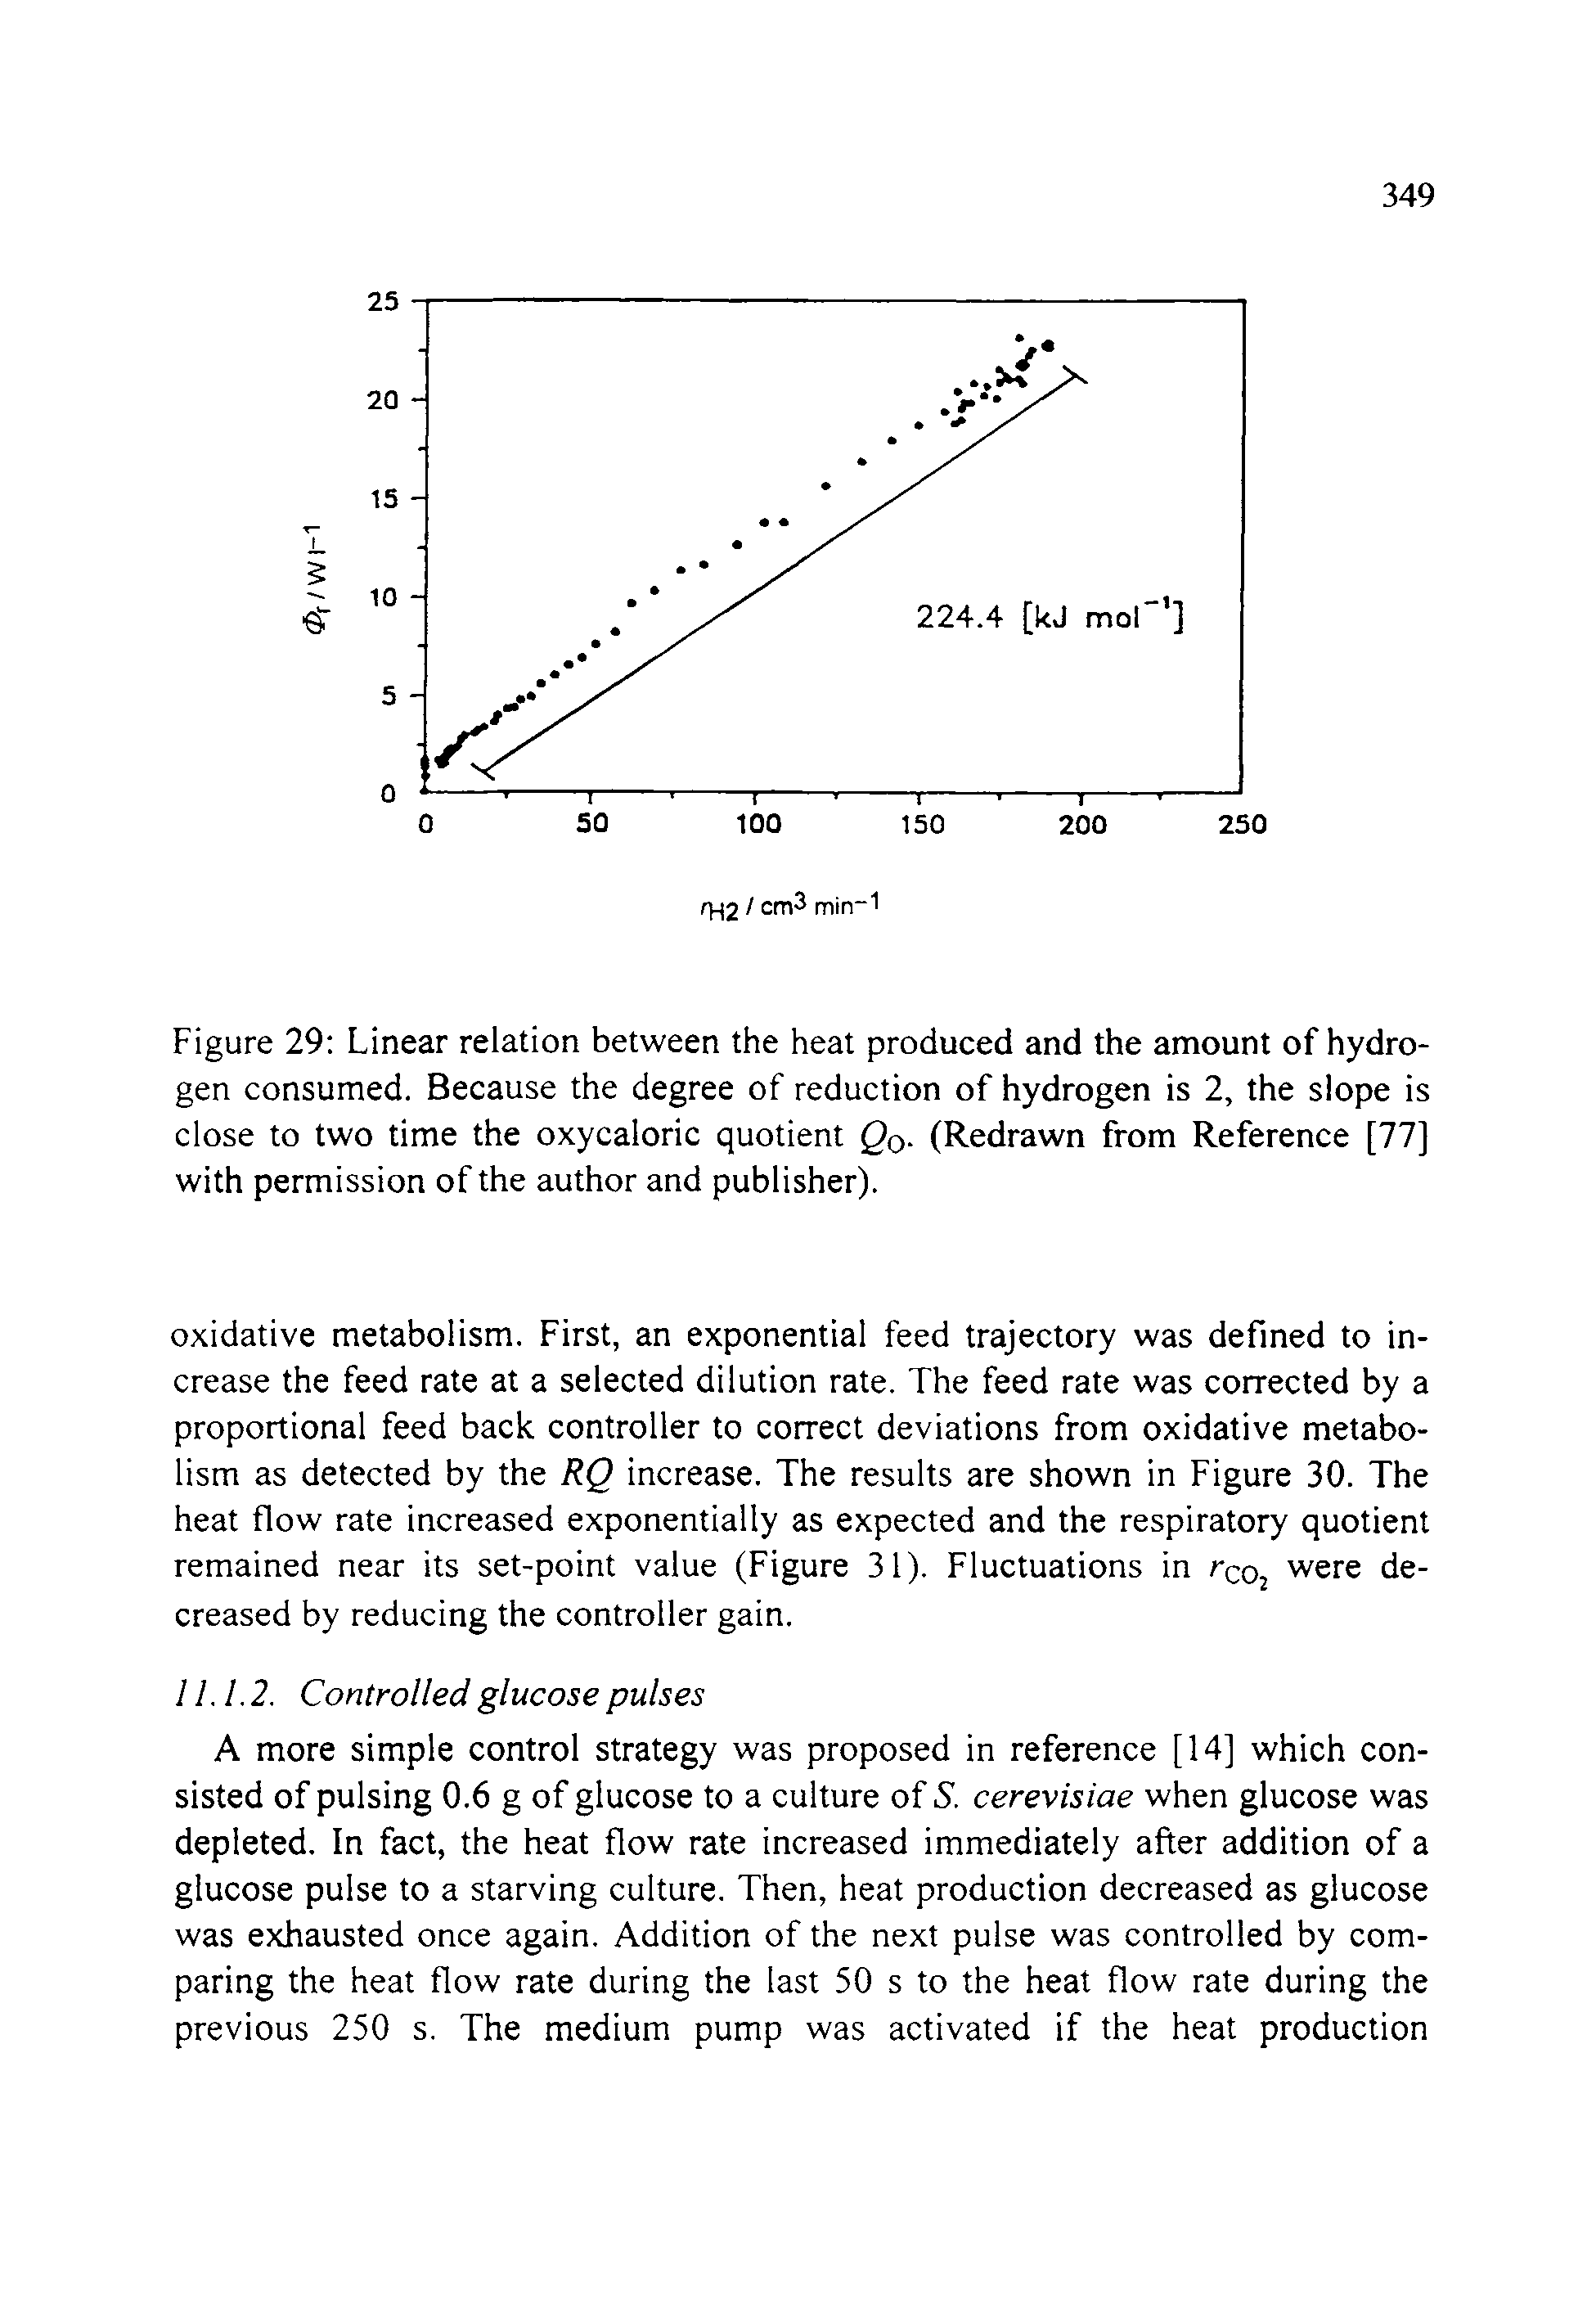 Figure 29 Linear relation between the heat produced and the amount of hydrogen consumed. Because the degree of reduction of hydrogen is 2, the slope is close to two time the oxycaloric quotient Qo- (Redrawn from Reference [77] with permission of the author and publisher).